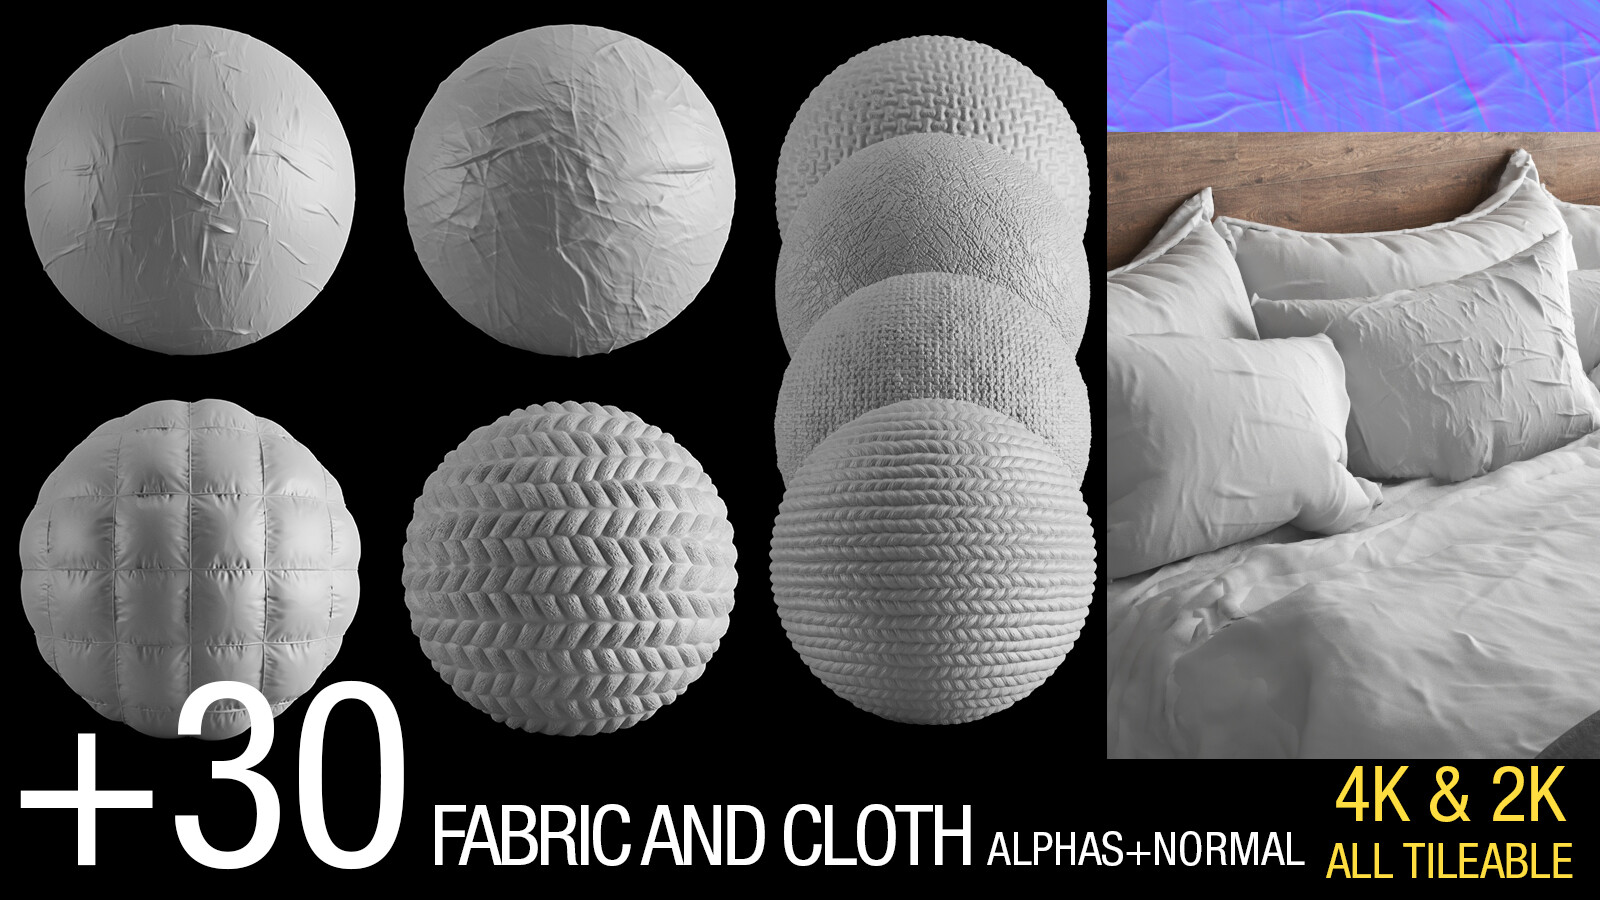 +30 fabric and wrinckle ALPHAS+NORMAL v2 (4K&2K ,All tileable)